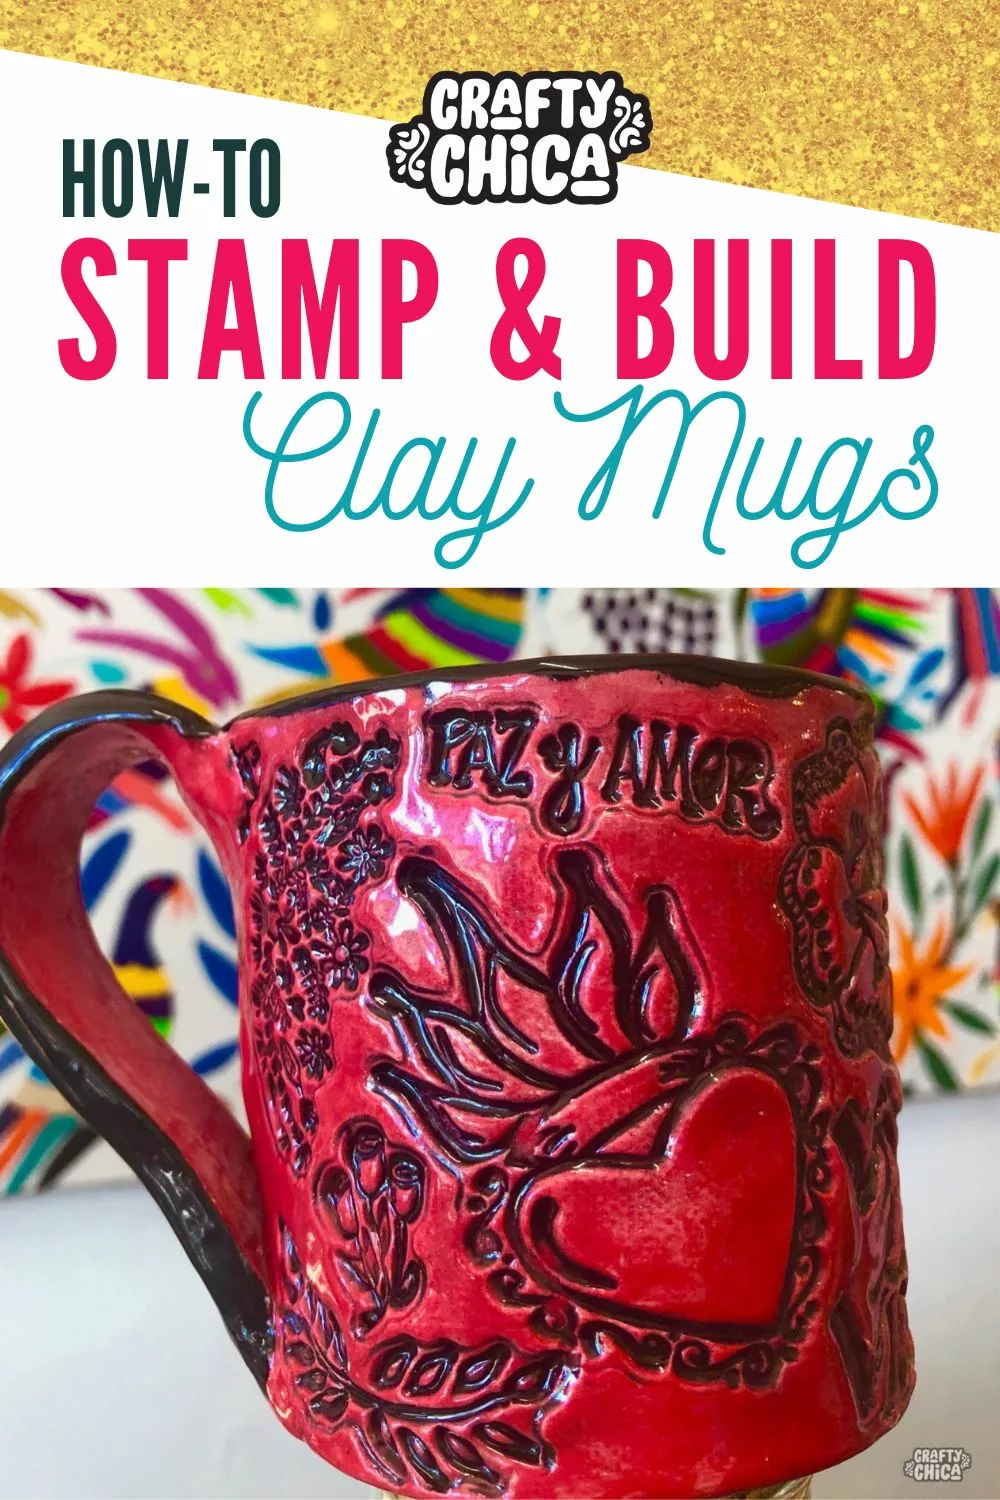 stamped clay mugs